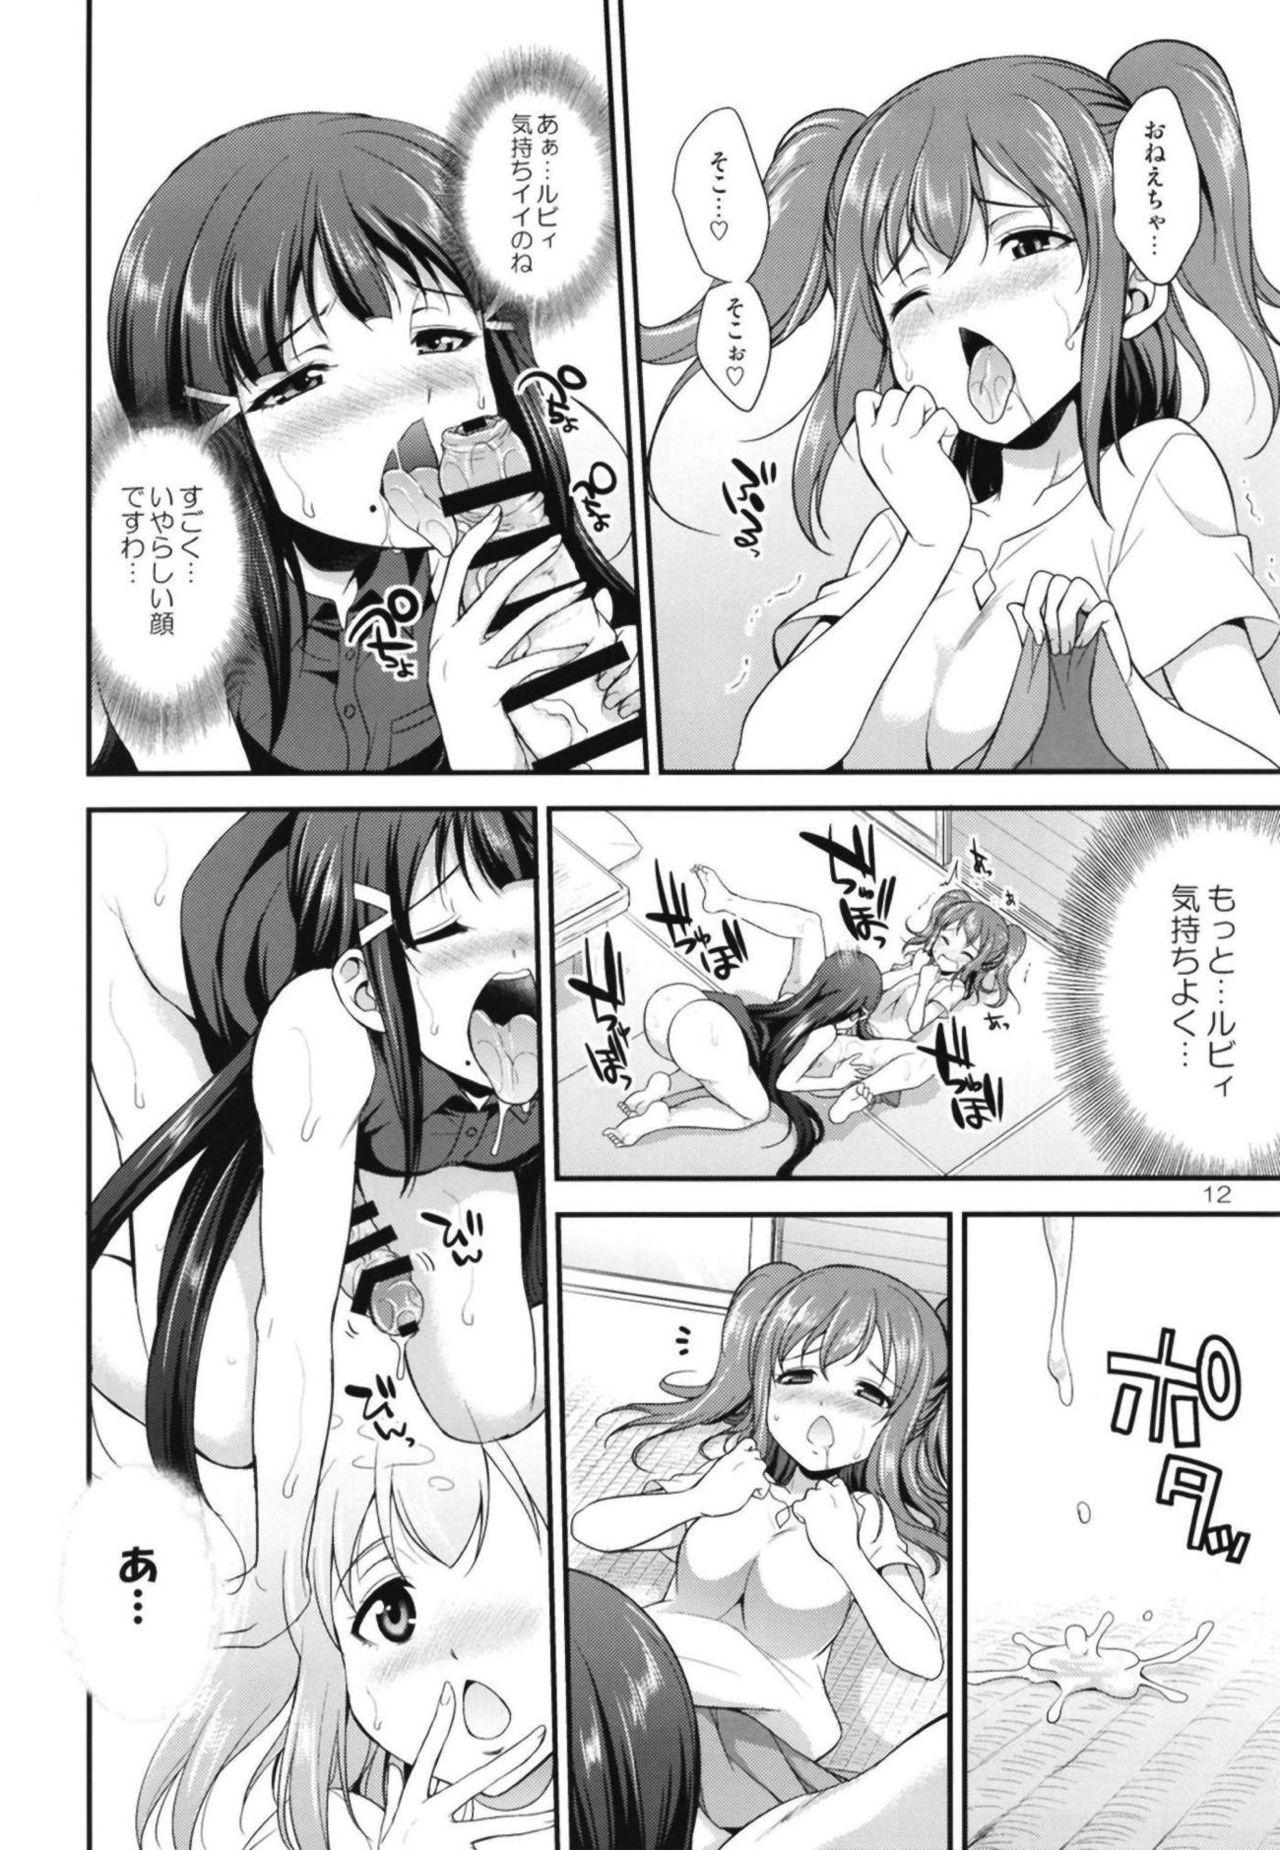 Topless FUTAqours side-dia&ruby - Love live sunshine Blow Jobs - Page 11